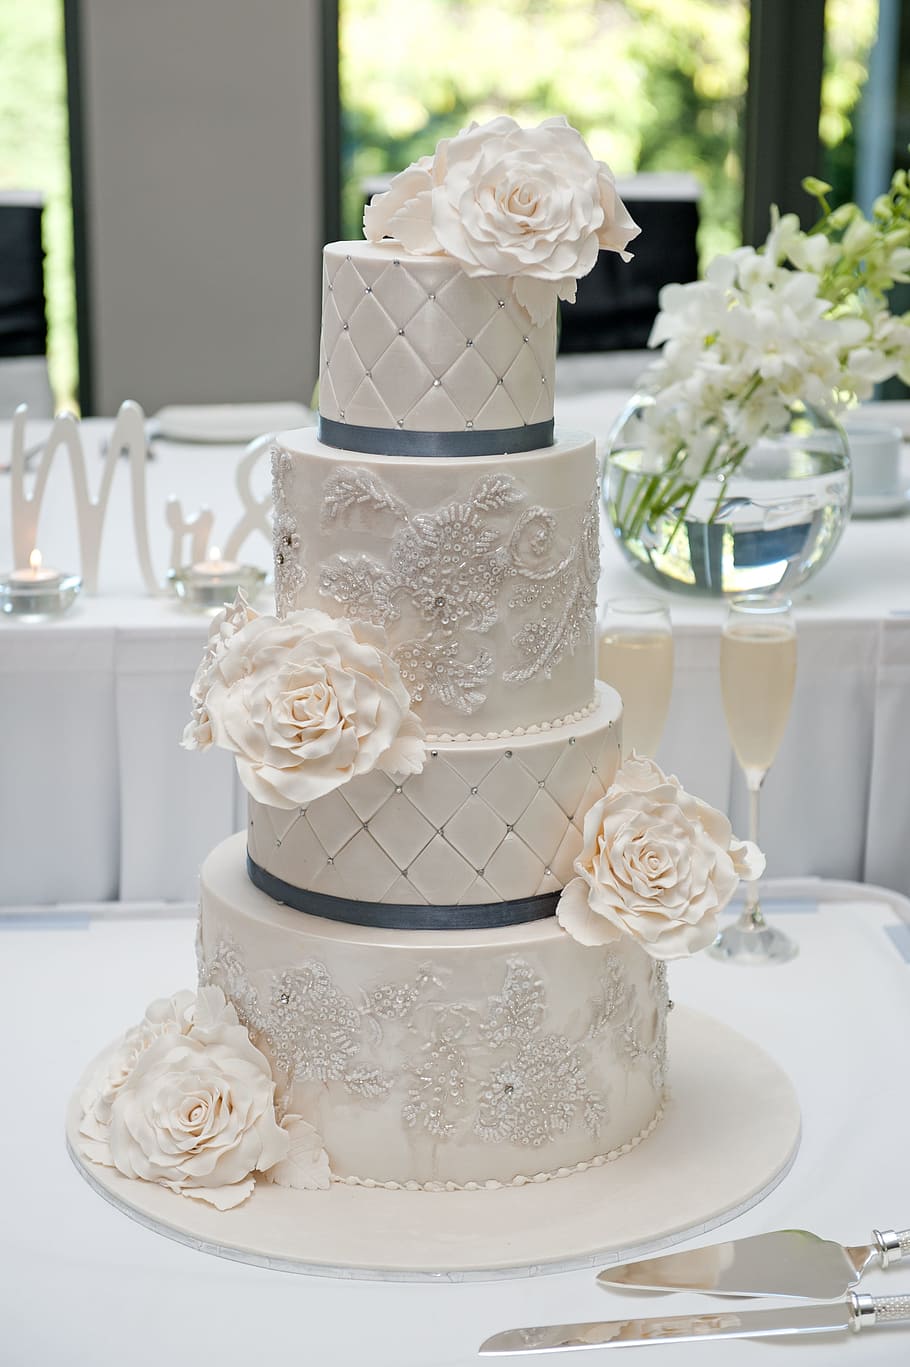 white, icing-covered 4- tier cake, 4-tier, tier, wedding cake, table, wedding, cake, food, sweet